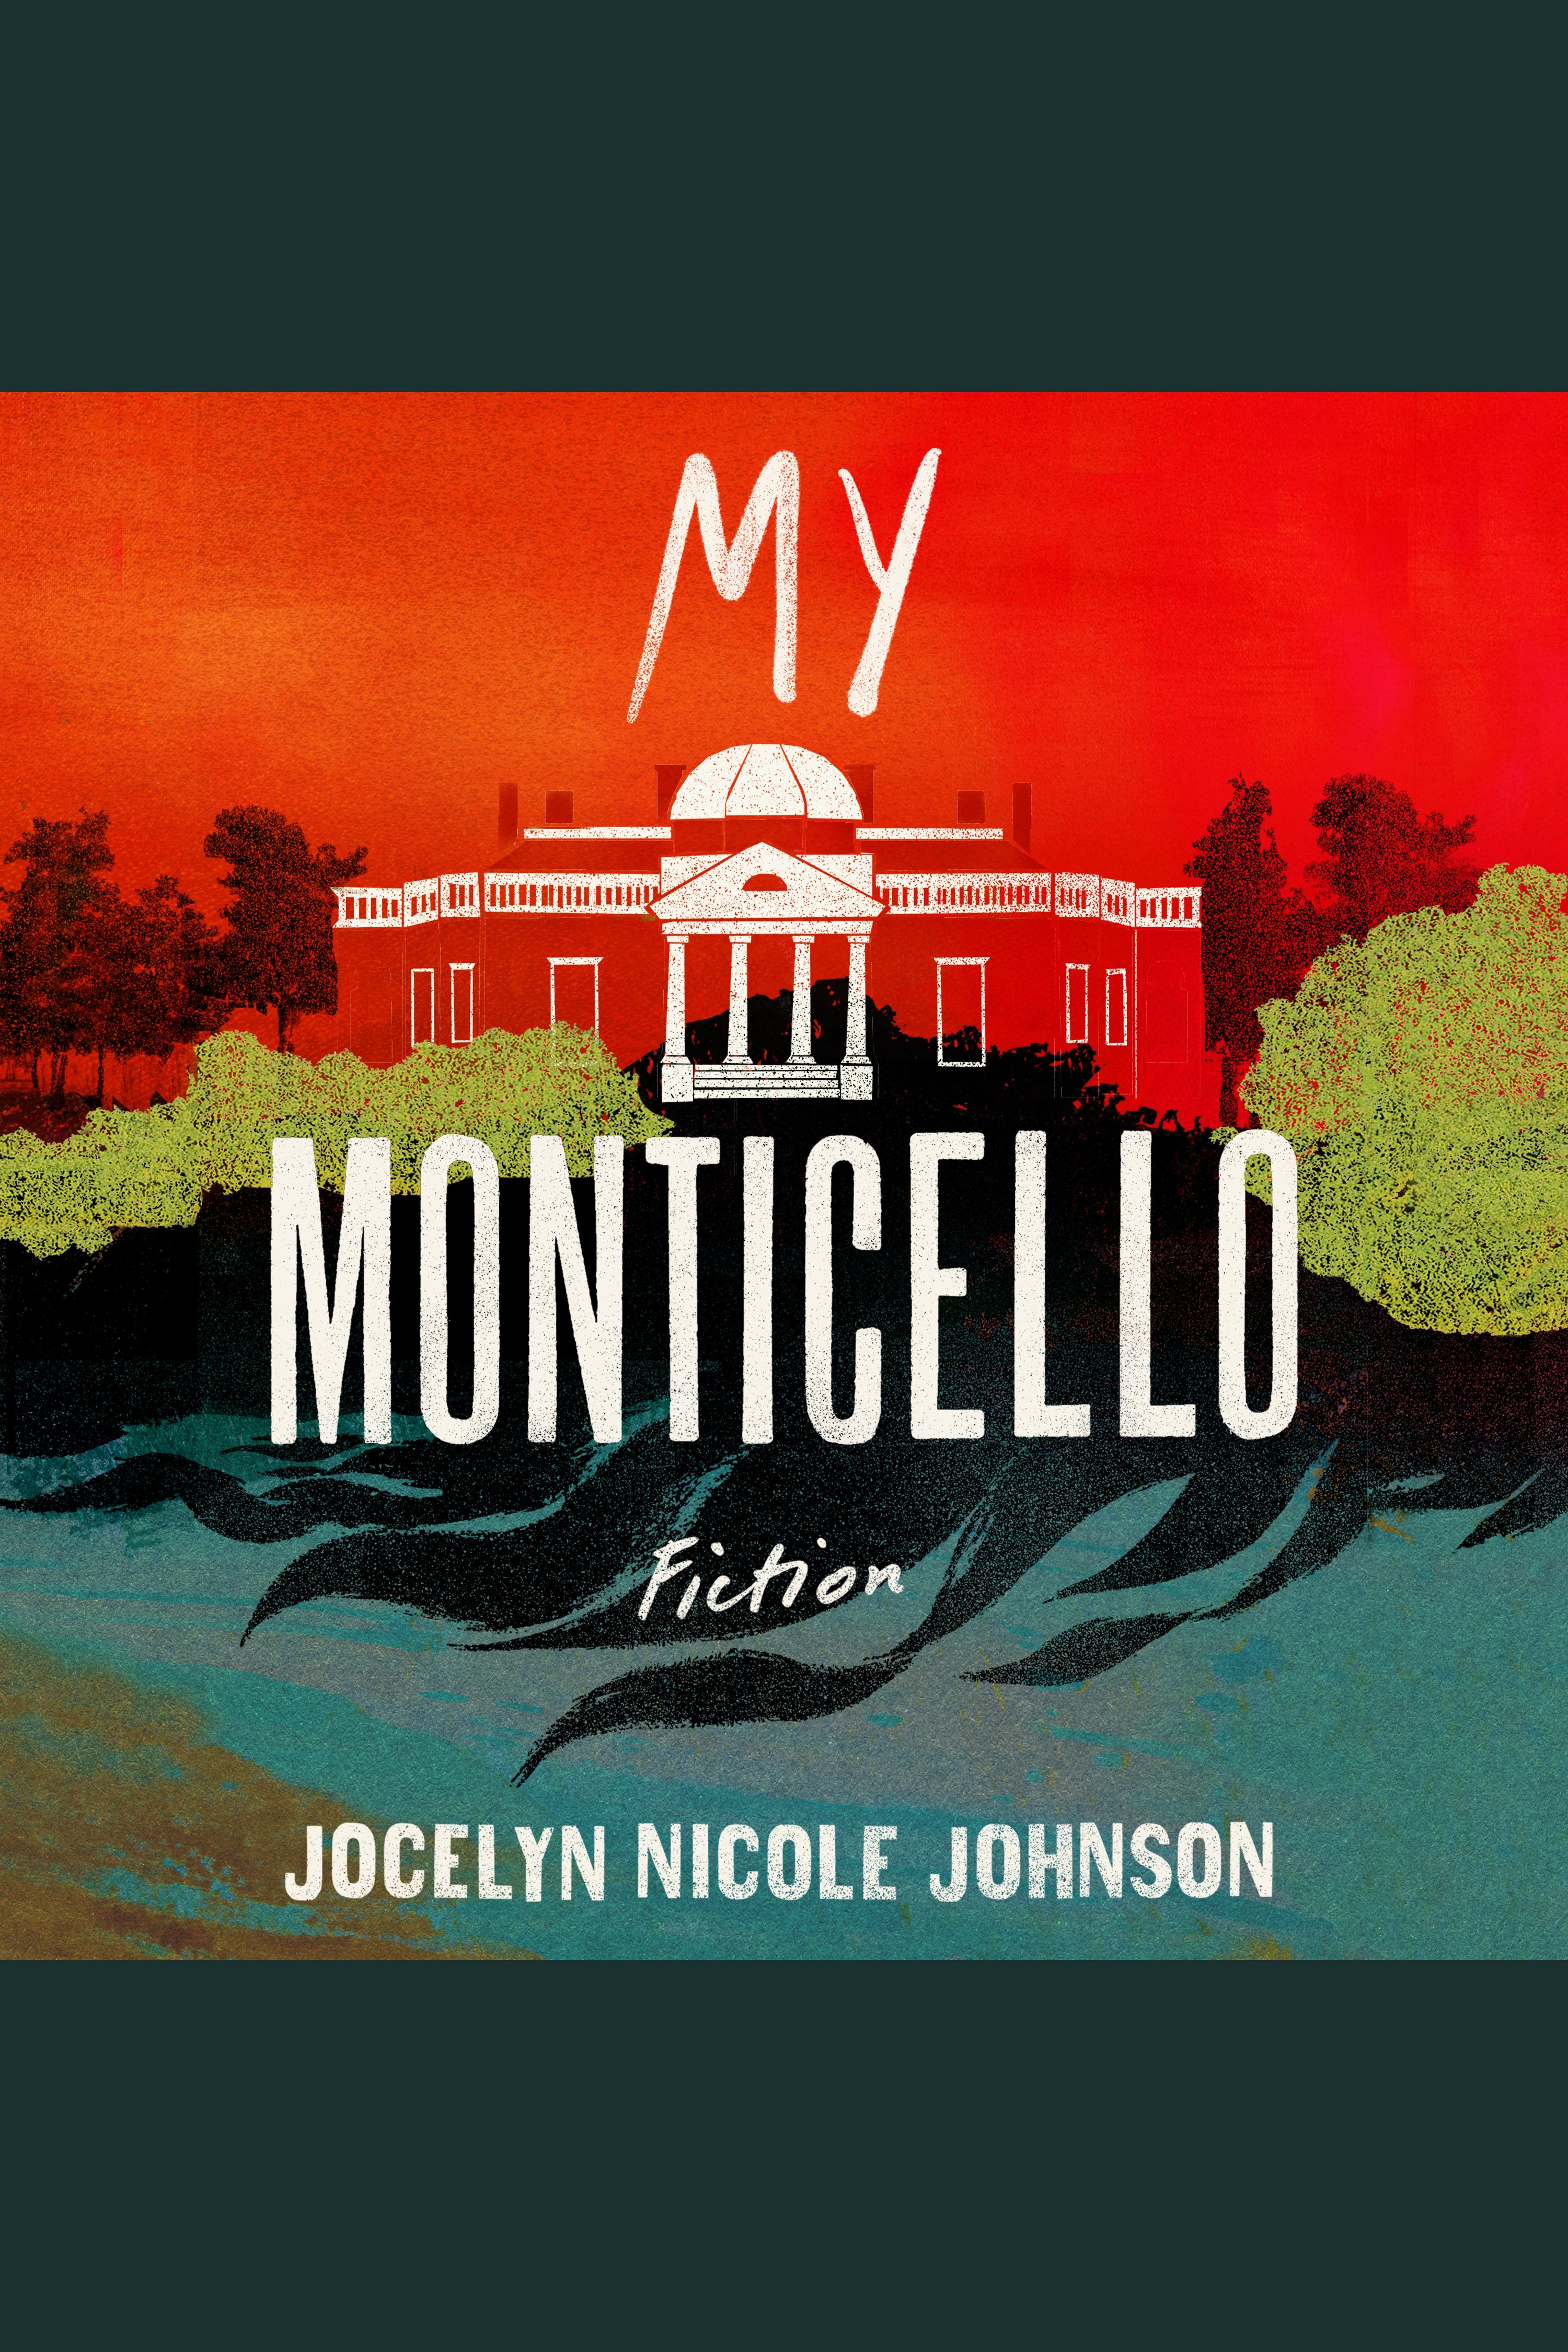 My Monticello Fiction cover image